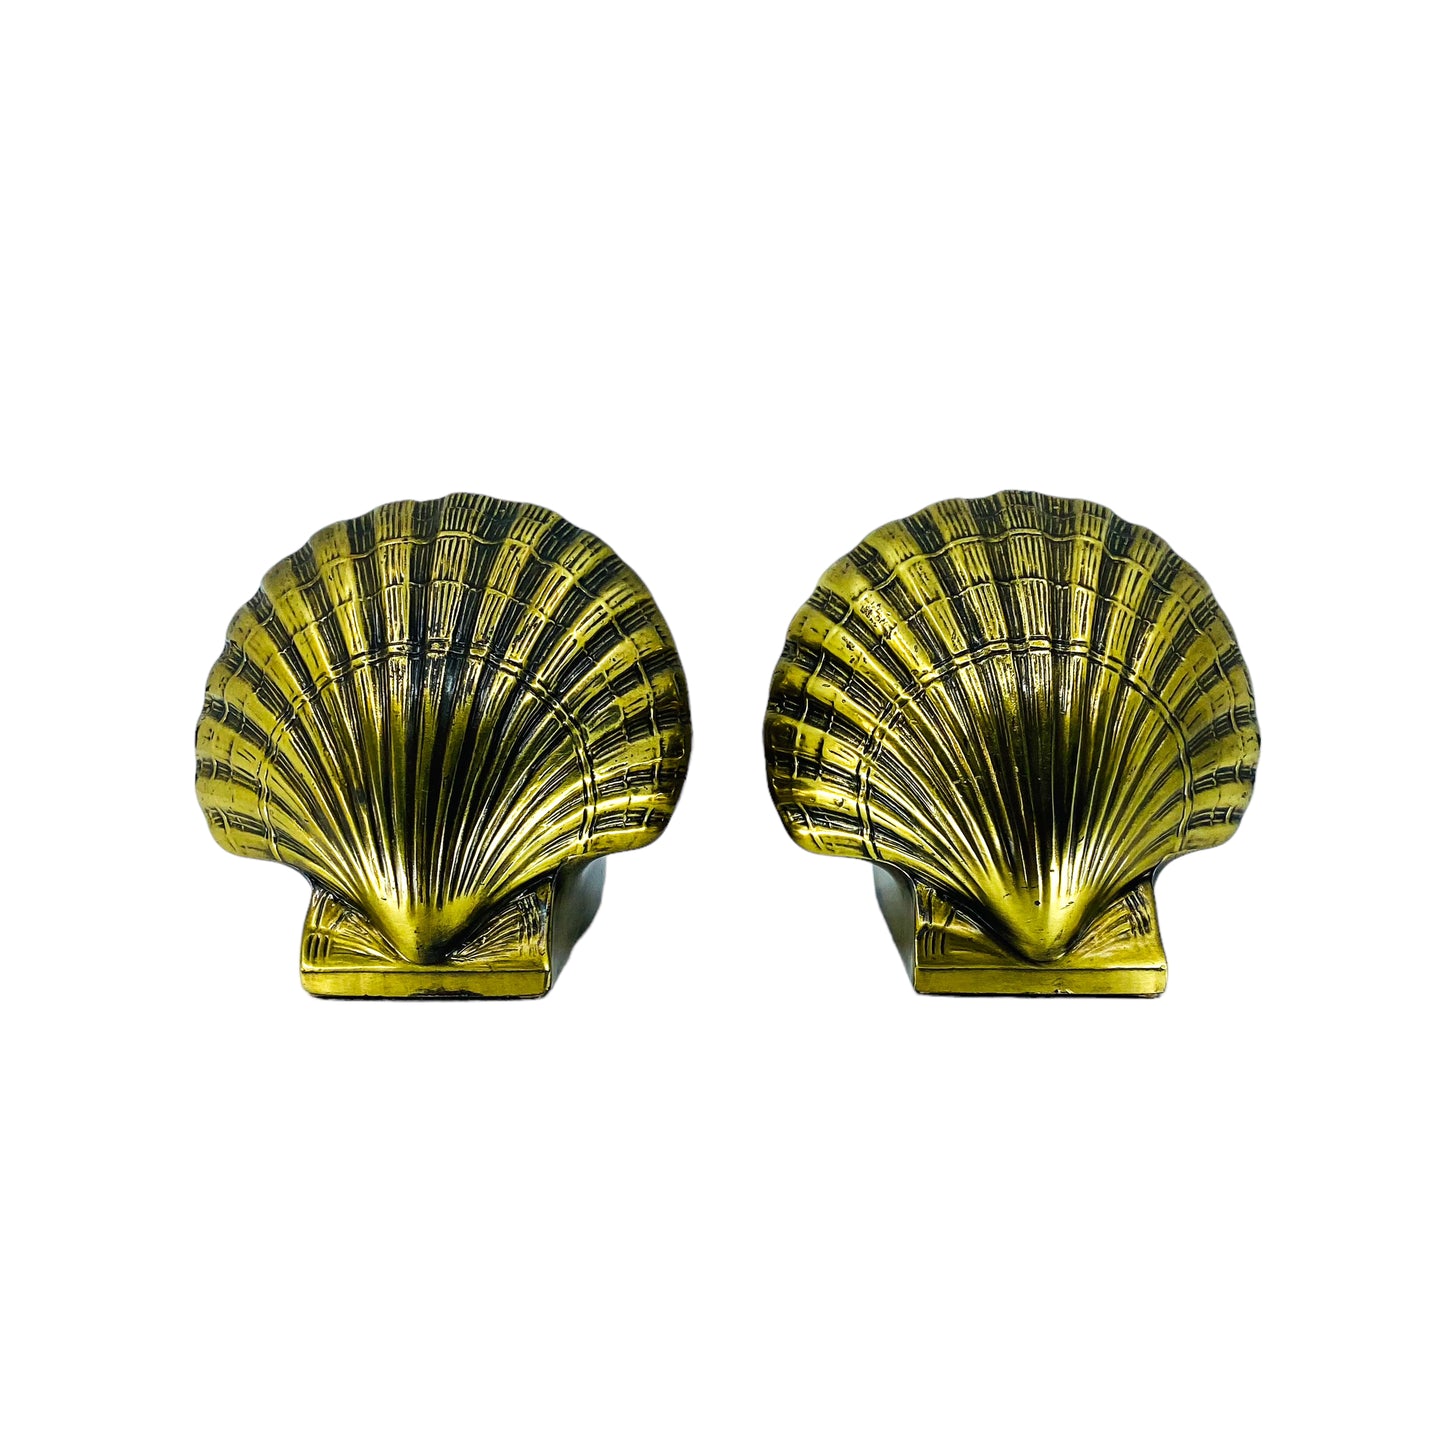 Vintage Solid Brass Shell Bookends